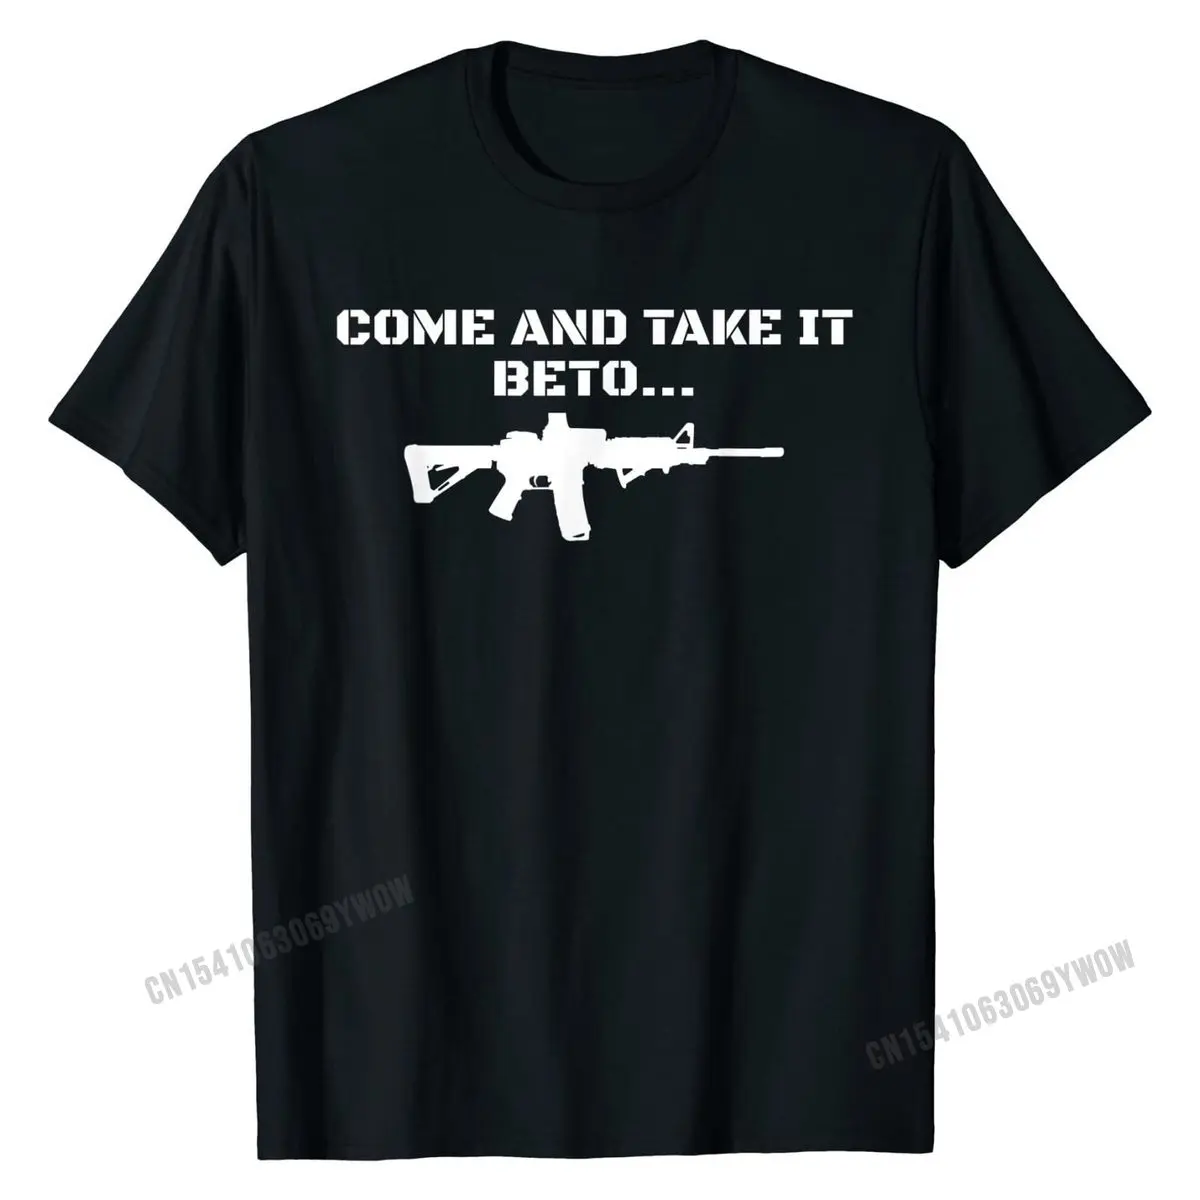 

Come and Take it Beto AR15 Pro 2nd Amendment Gift Pro Trump T-Shirt Casualcomfortable Tops T Shirt Funny Cotton Men T Shirts